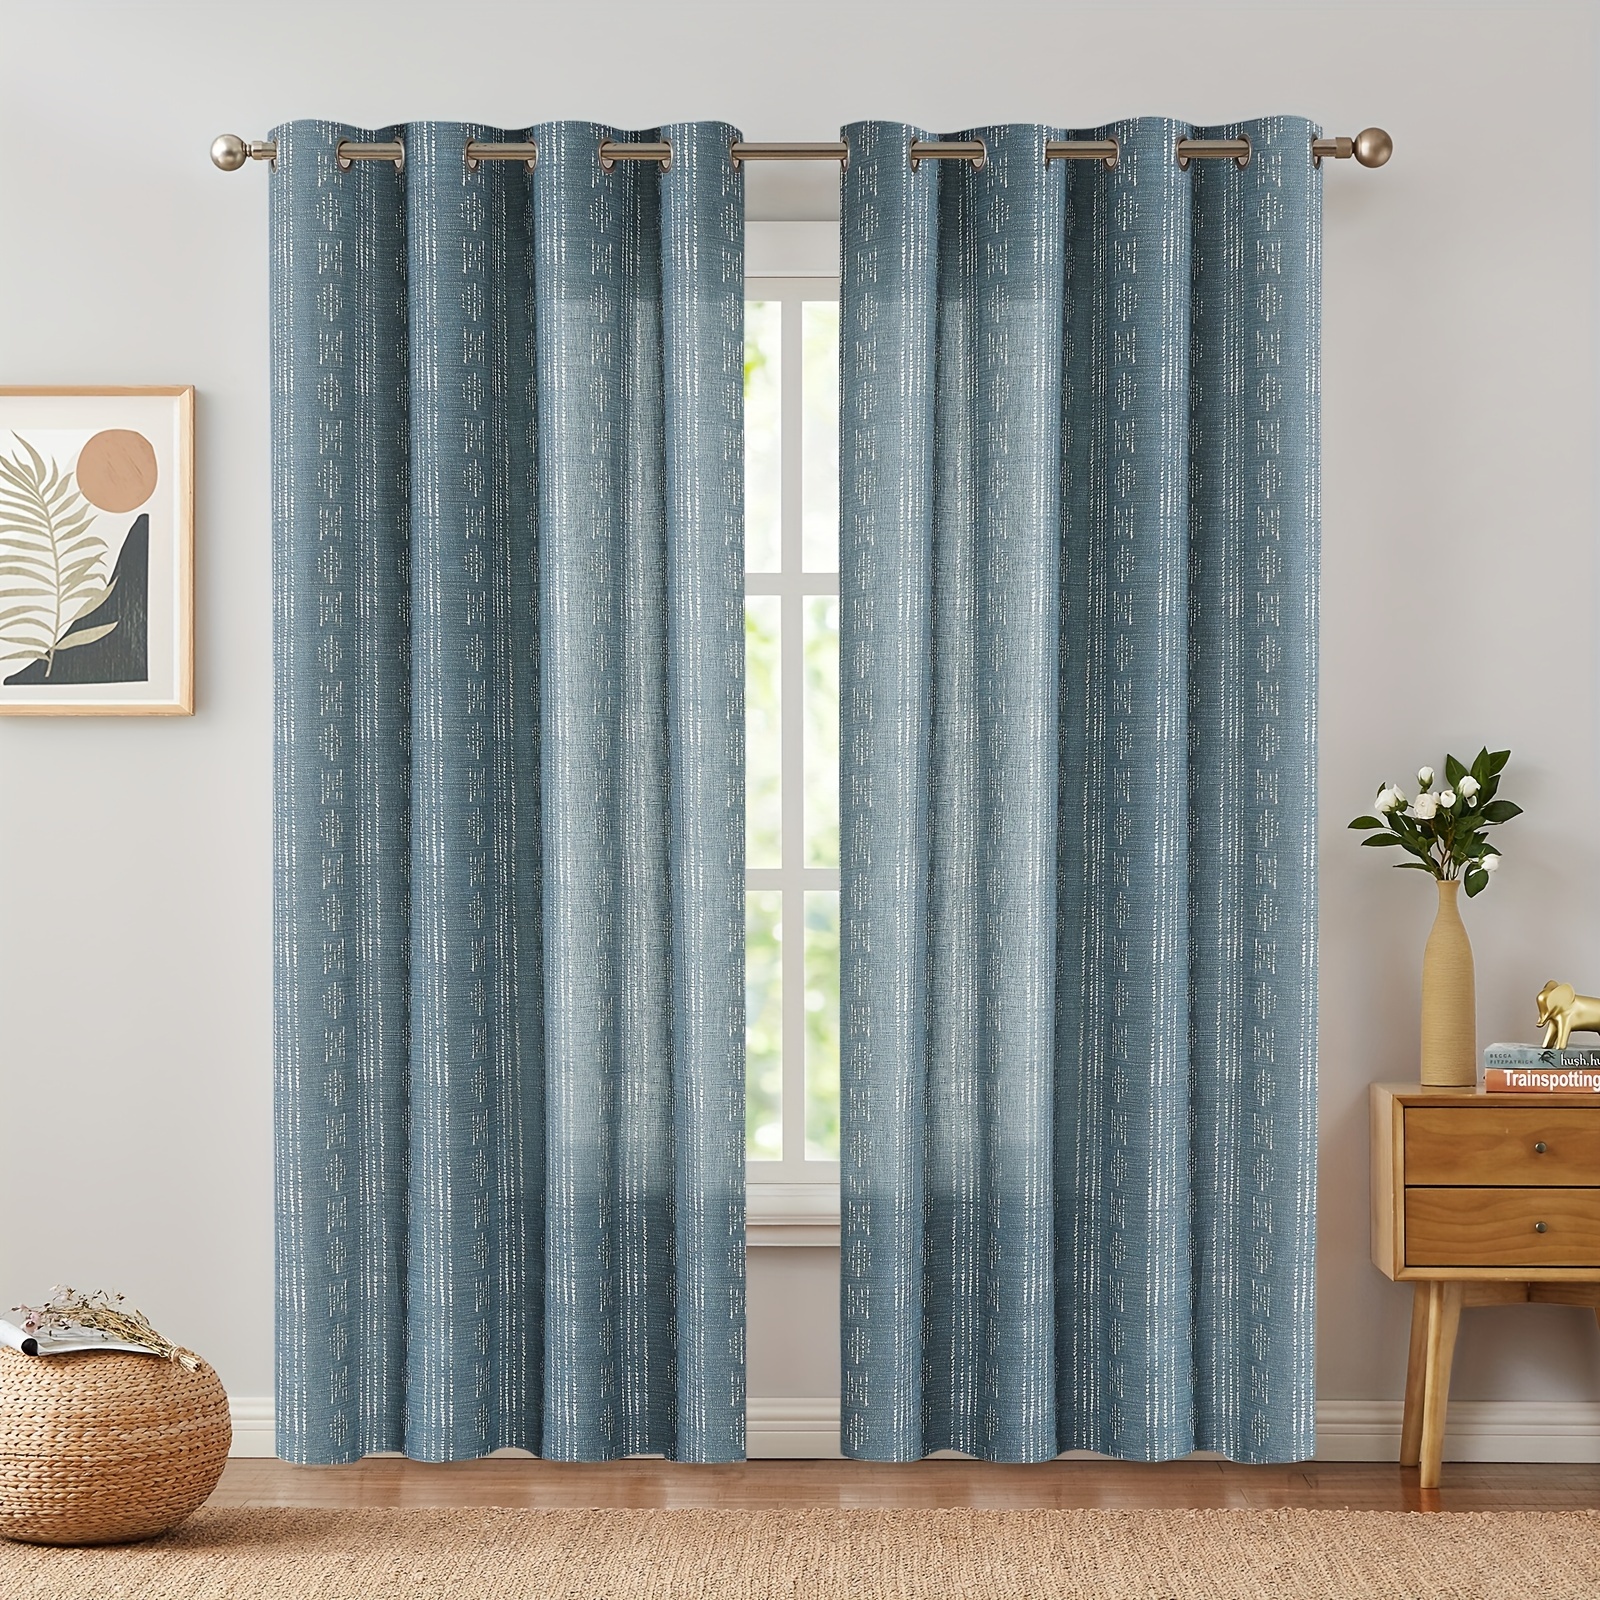 

Collact Boho Curtains Linen Curtains Blue Geometric Striped Printed Curtains 84 Inches Long For Living Room Farmhouse Rustic Patterned Drapes Light Filtering Grommet Window Treatments 2 Panels Blue